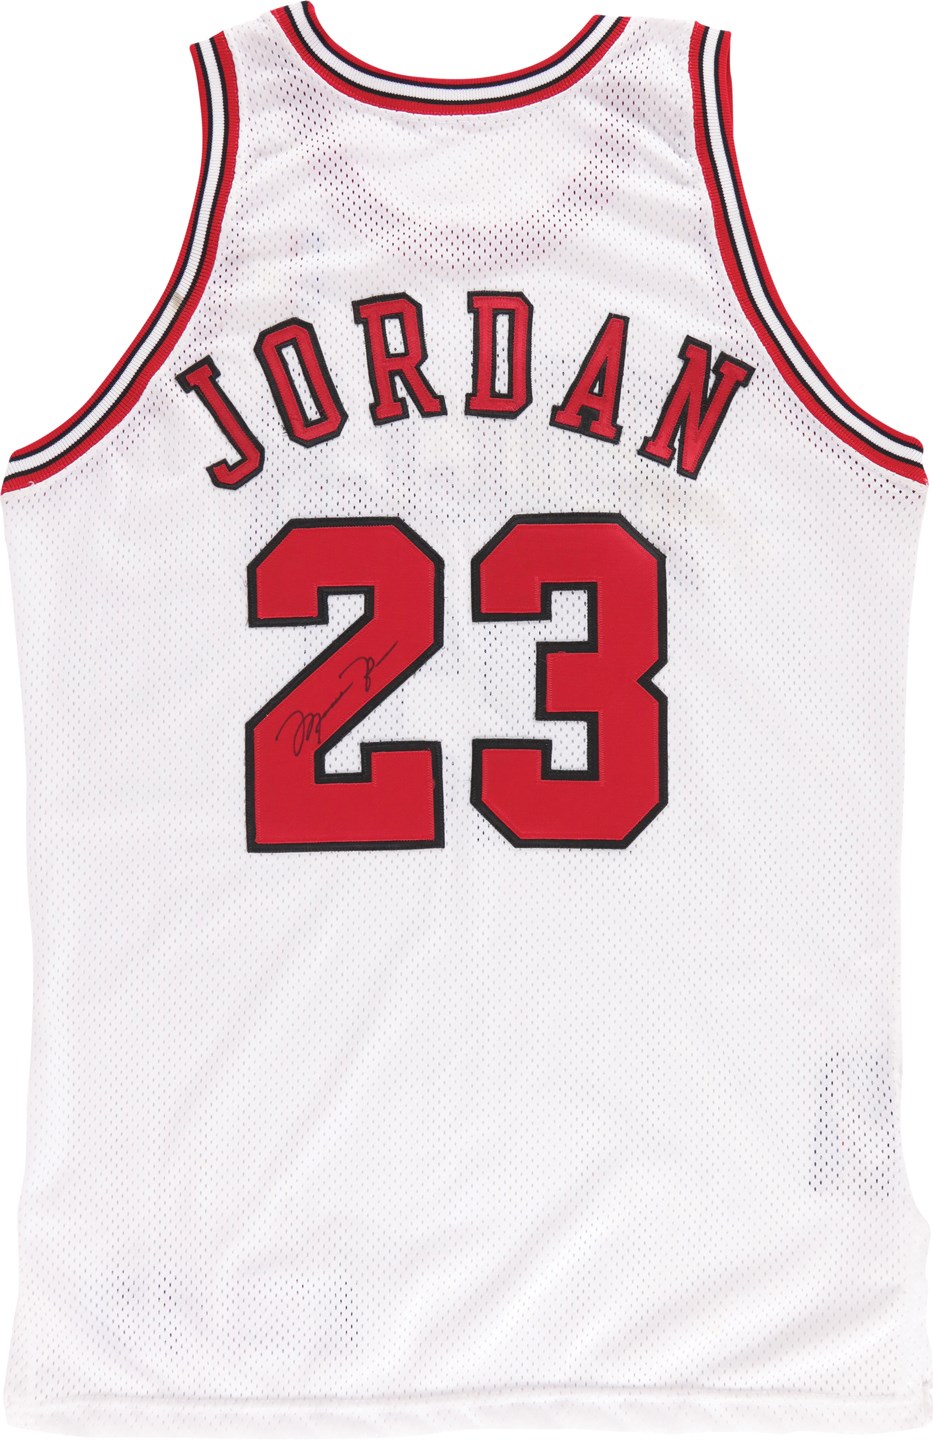 - 1995-96 Michael Jordan Chicago Bulls Signed Game Worn Jersey Sourced from Nick Anderson (JSA)